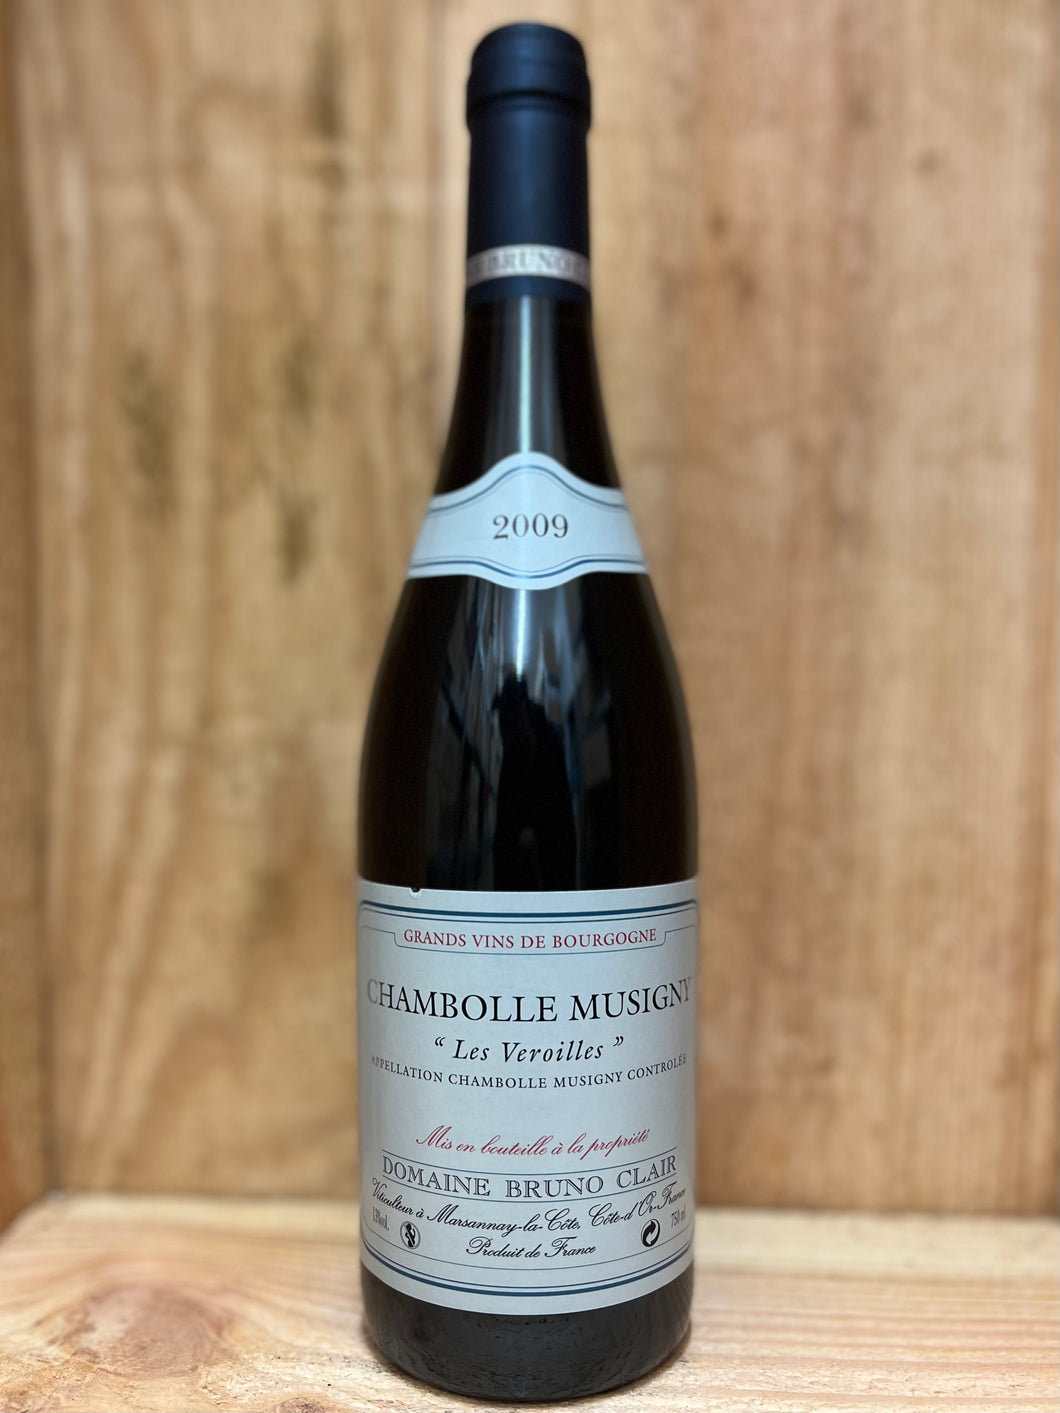 Domaine Bruno Clair 2009 Chambolle-Musigny Les Veroilles